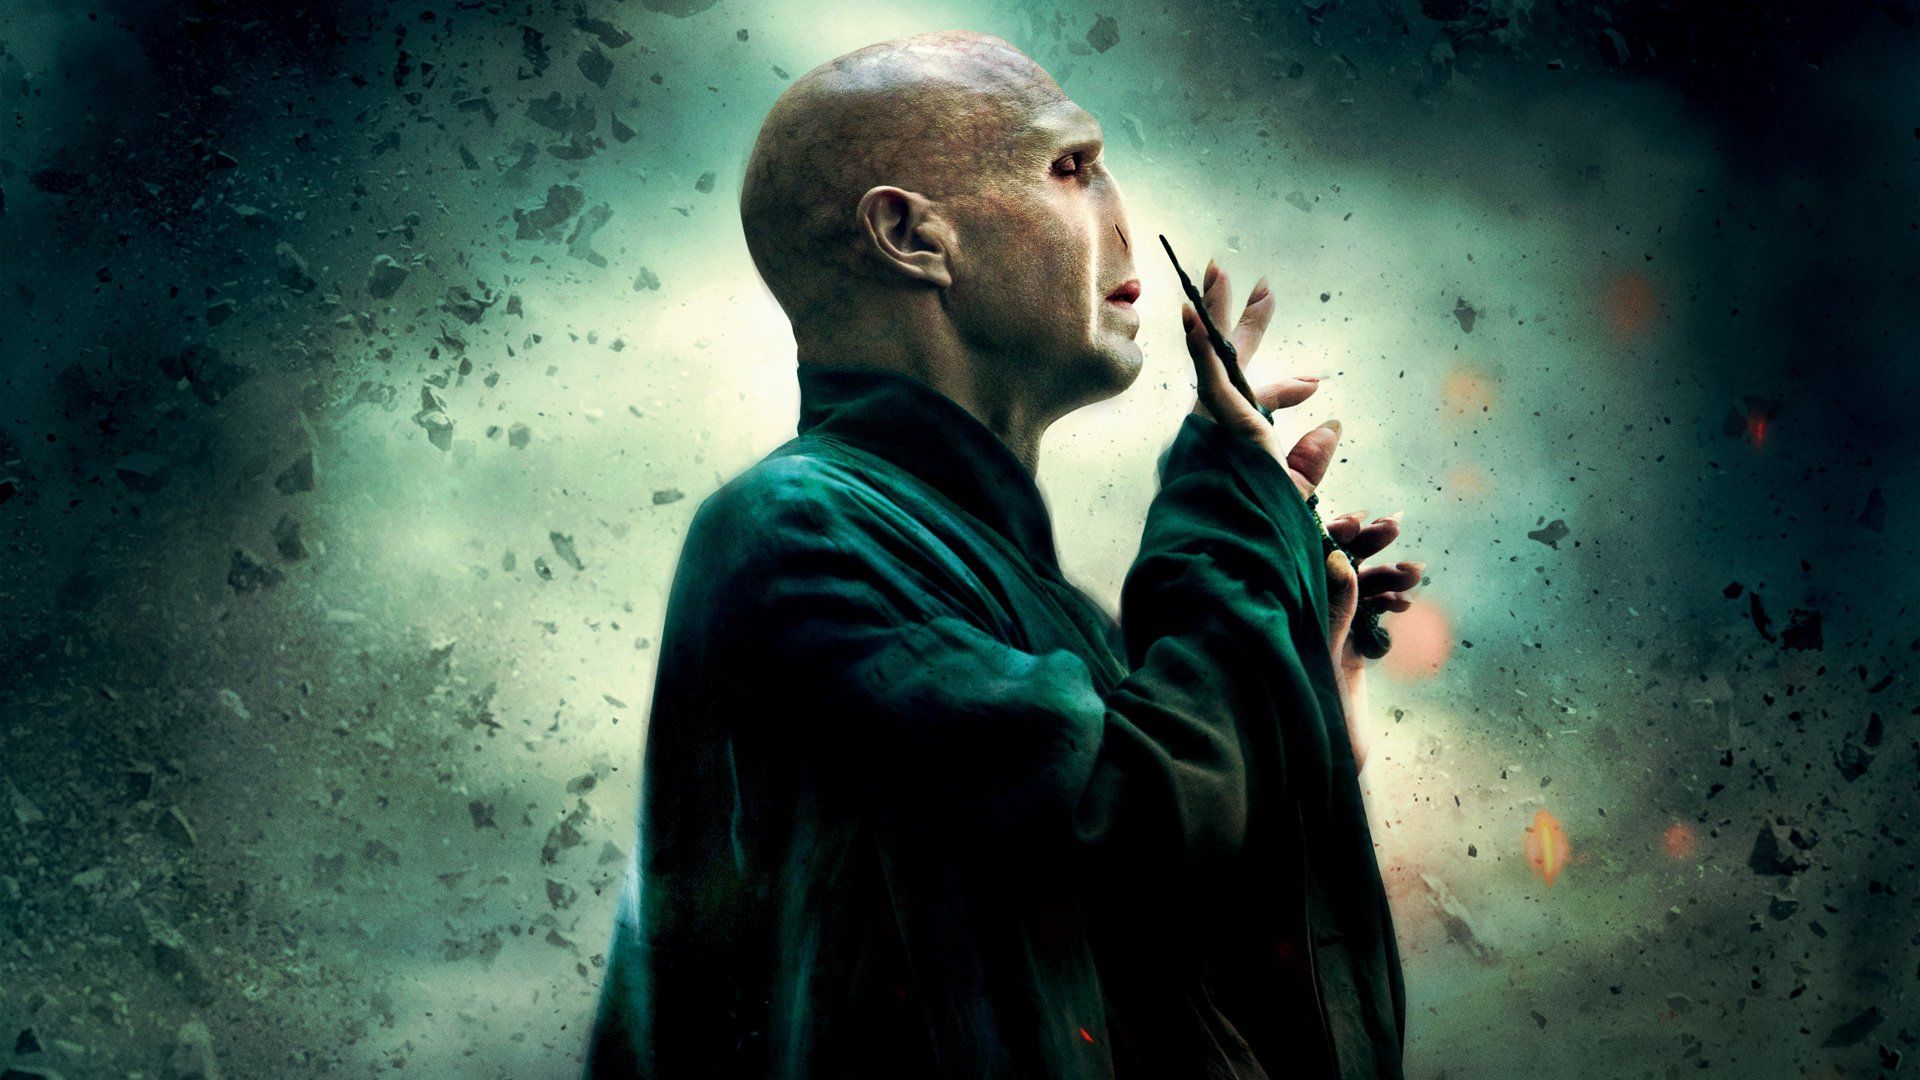 General 1920x1080 Lord Voldemort wizard Harry Potter Harry Potter and the Deathly Hallows movie poster the dark lord tom riddle elder wand movie characters